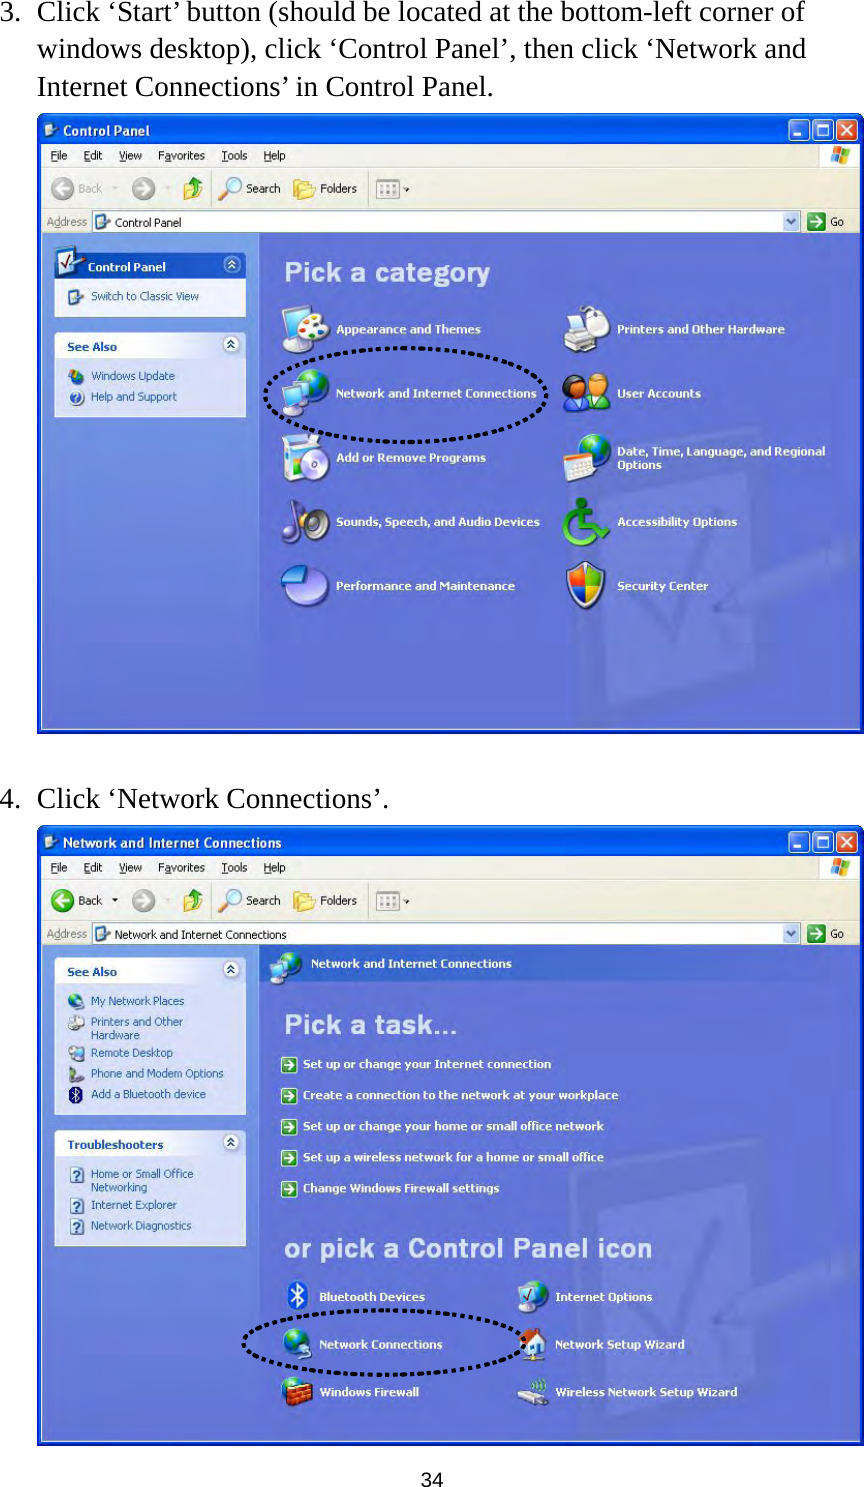  34 3. Click ‘Start’ button (should be located at the bottom-left corner of windows desktop), click ‘Control Panel’, then click ‘Network and Internet Connections’ in Control Panel.   4. Click ‘Network Connections’.  